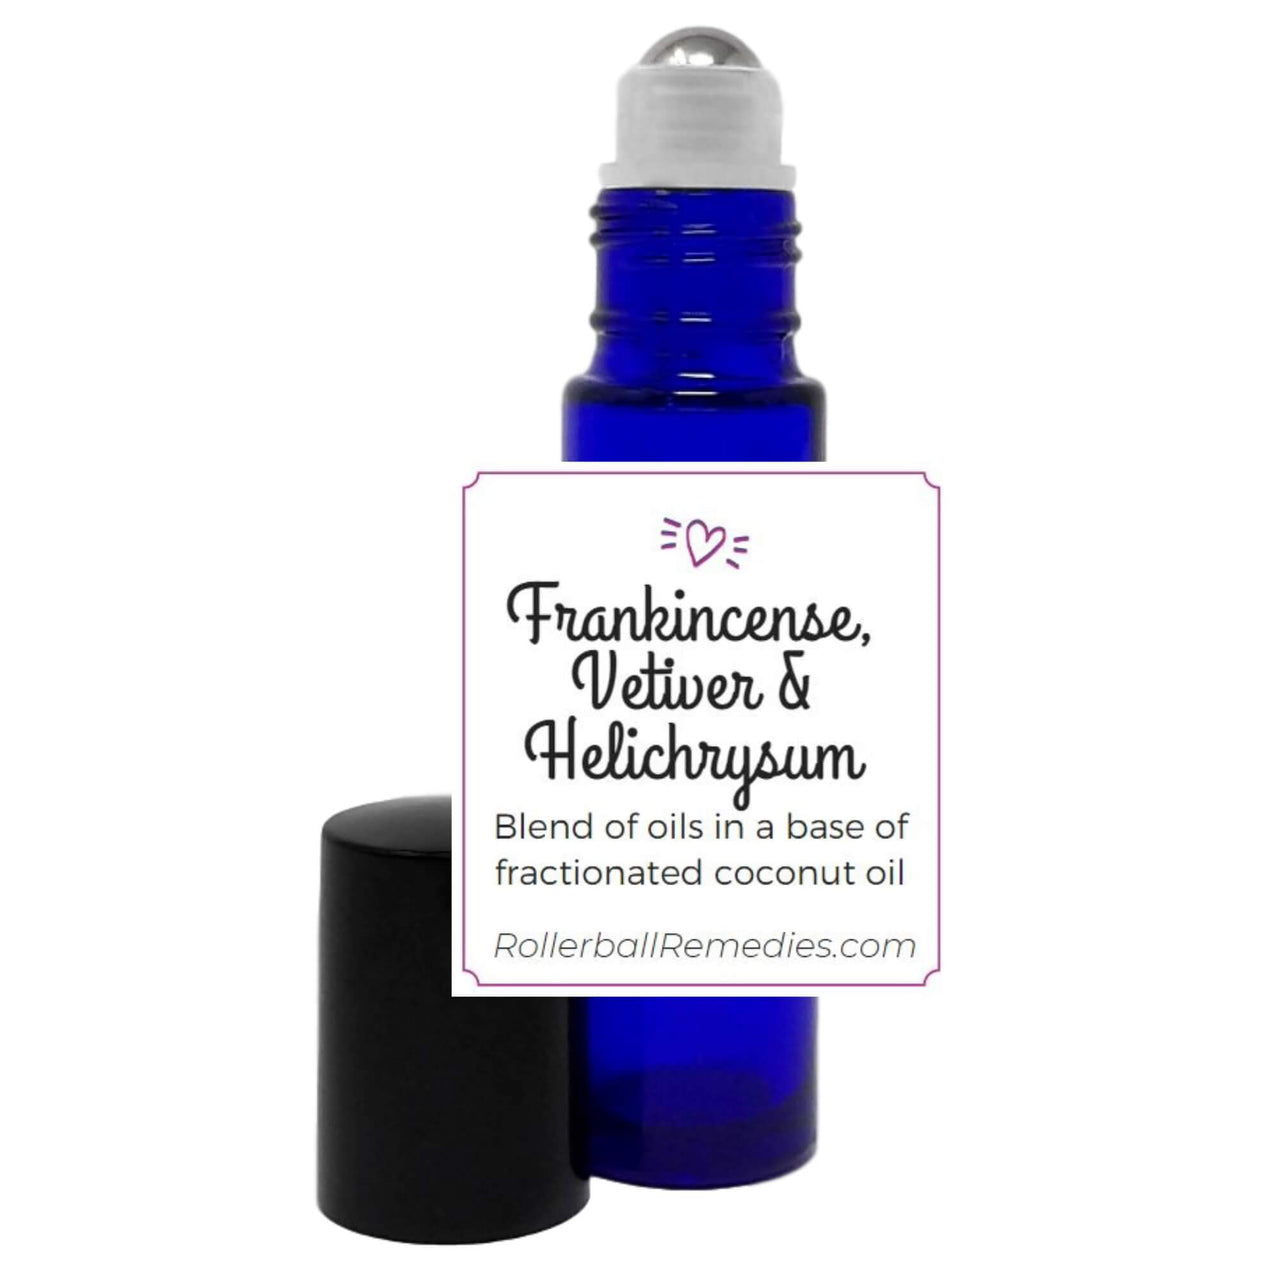 Frankincense, Vetiver and Helichrysum Essential Oil Blend for Healing, Sleep, Mindfulness, Meditation